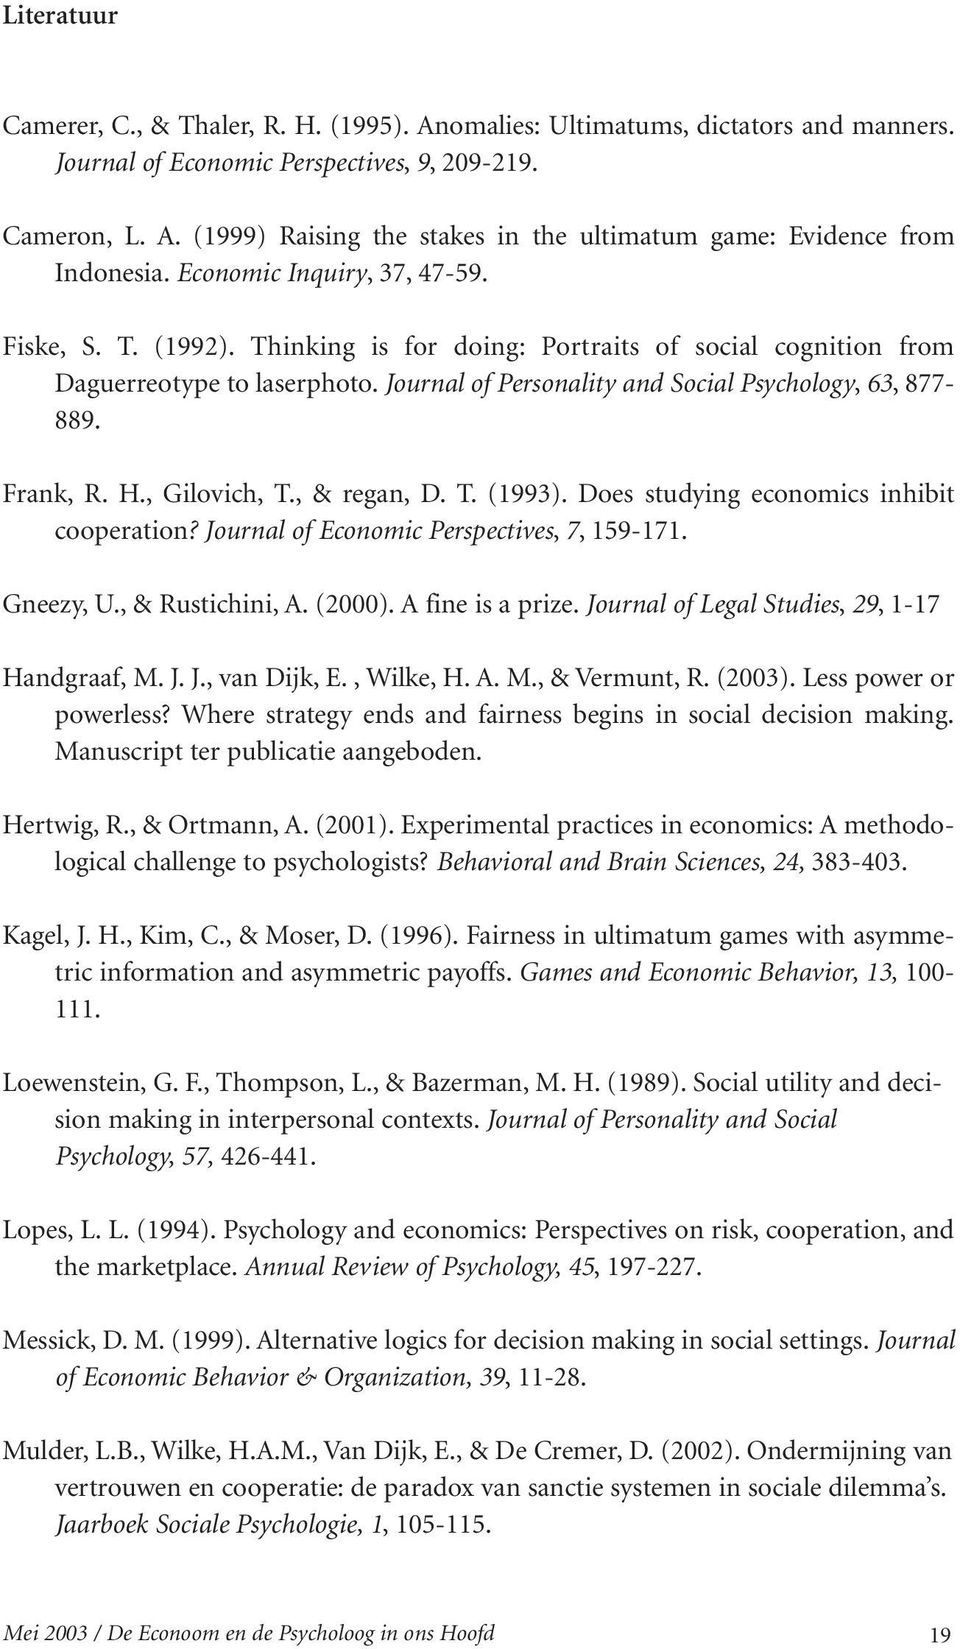 Frank, R. H., Gilovich, T., & regan, D. T. (1993). Does studying economics inhibit cooperation? Journal of Economic Perspectives, 7, 159-171. Gneezy, U., & Rustichini, A. (2000). A fine is a prize.